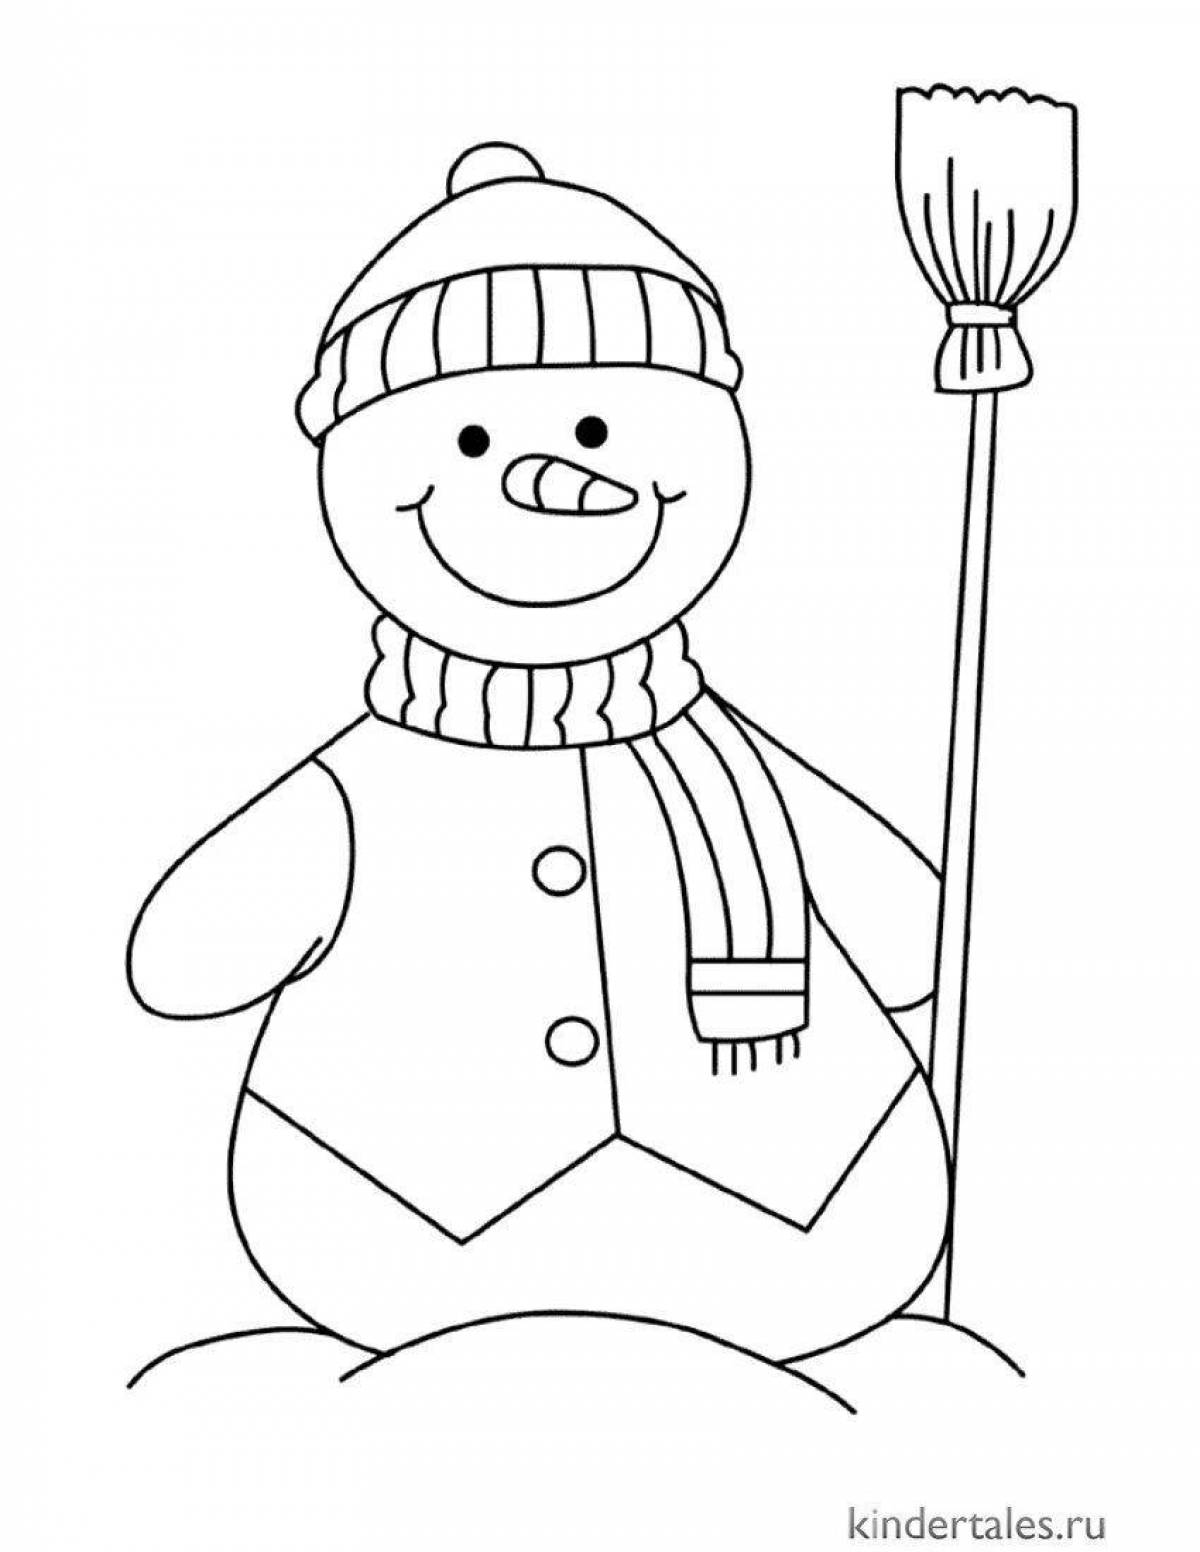 Fancy coloring snowman for children 5 years old